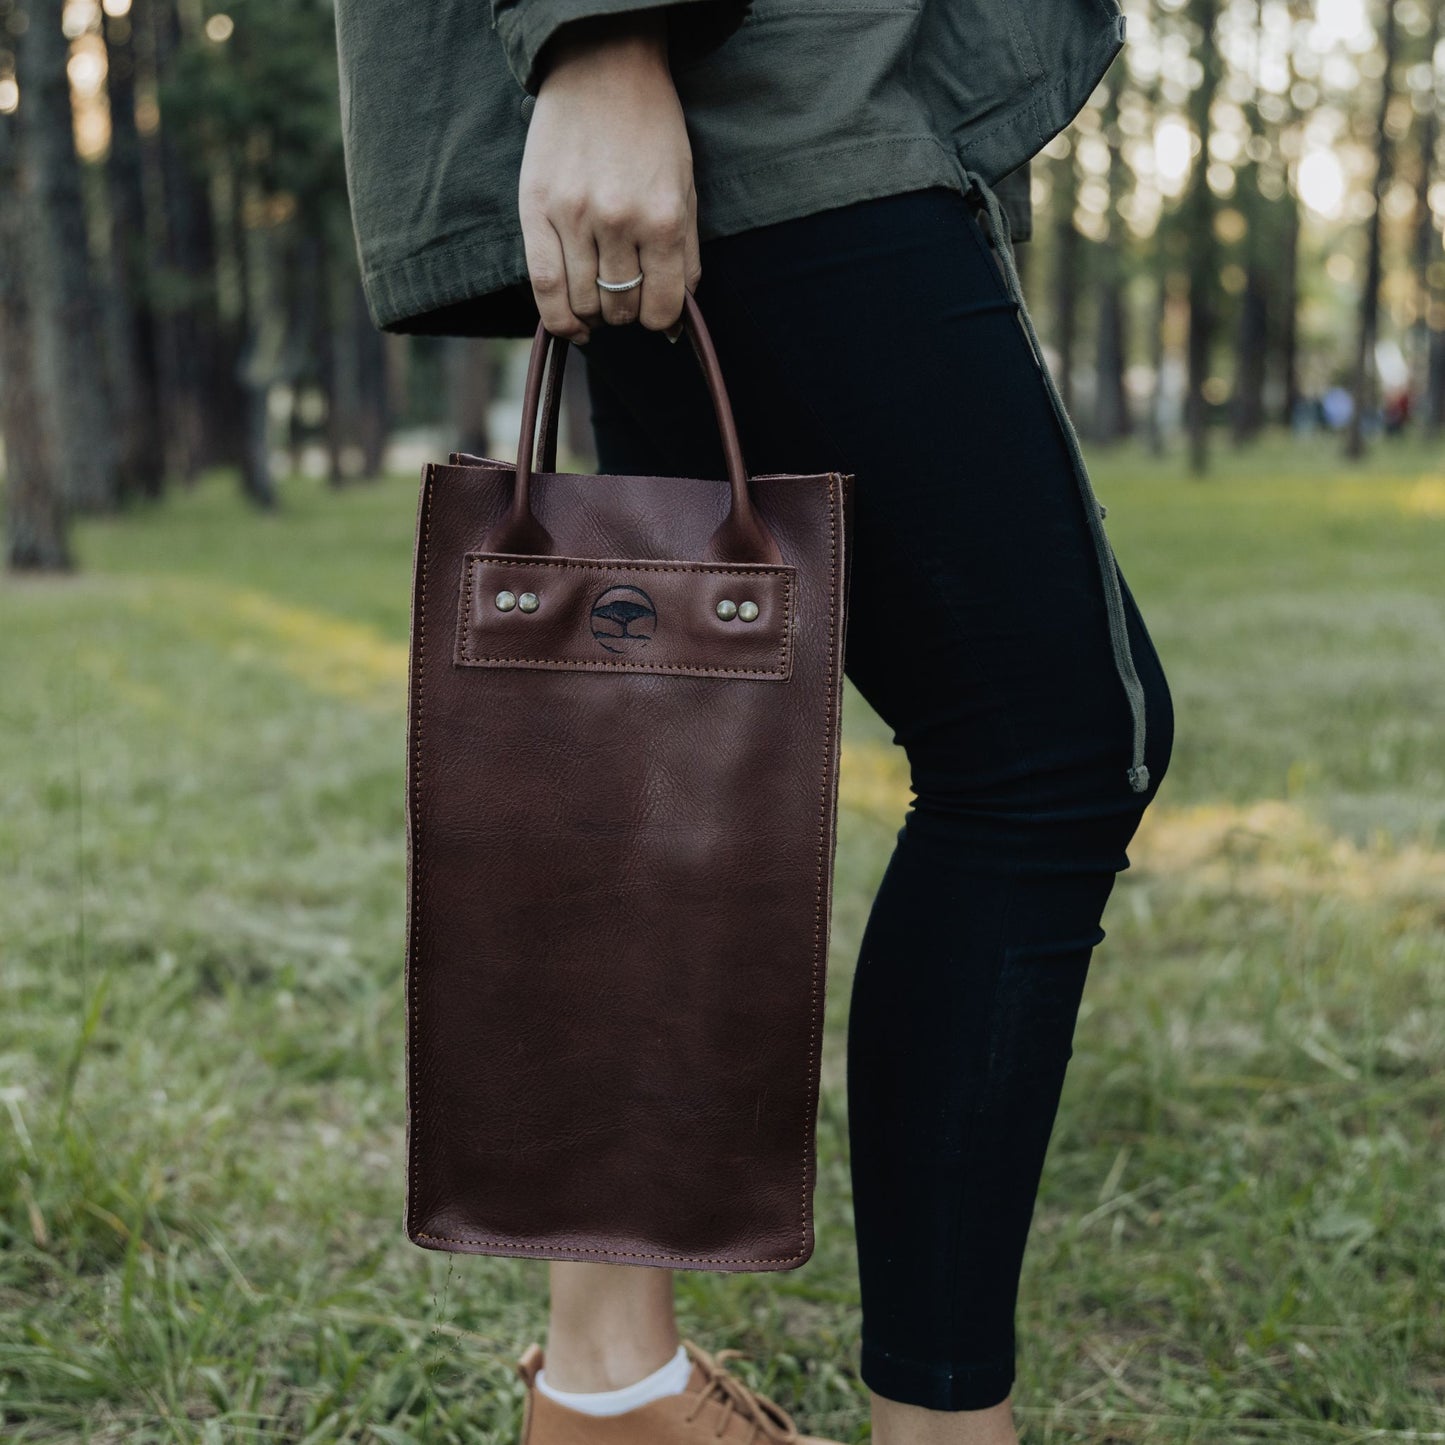 leather 2 bottle wine bag carry